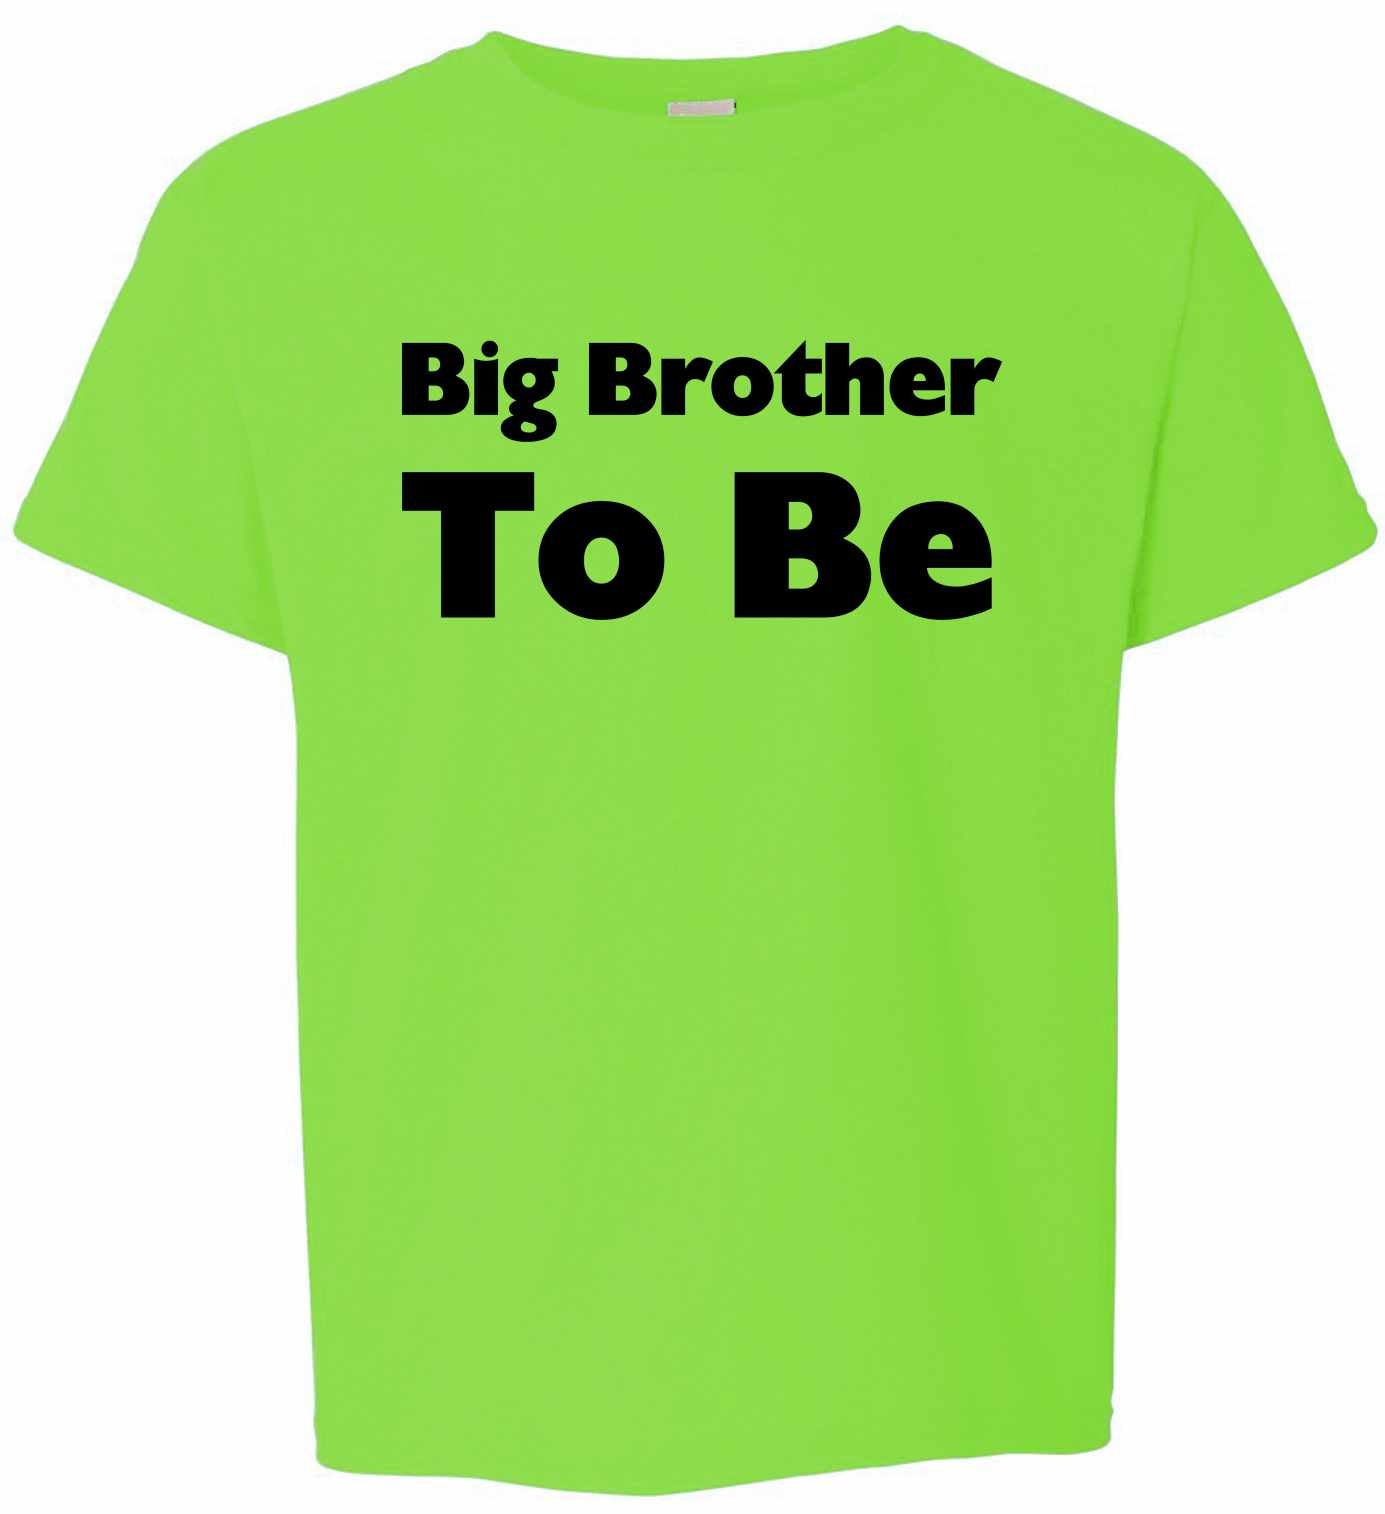 Big Brother To Be on Kids T-Shirt (#863-201)